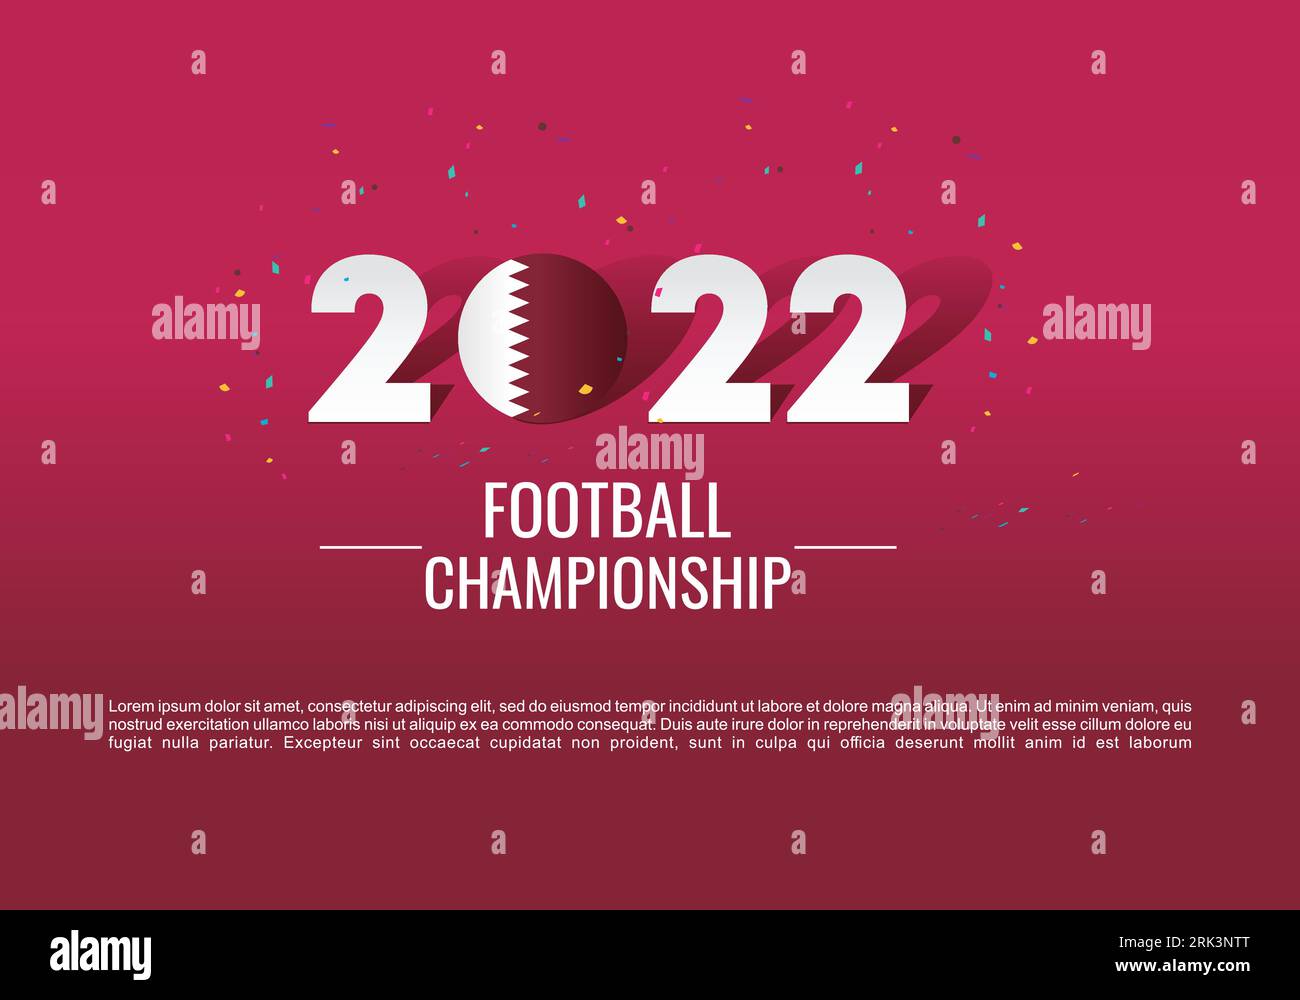 Football Tournament world Cup 2022 with Qatar flag. Background Design Template with burgundy color. Stock Vector